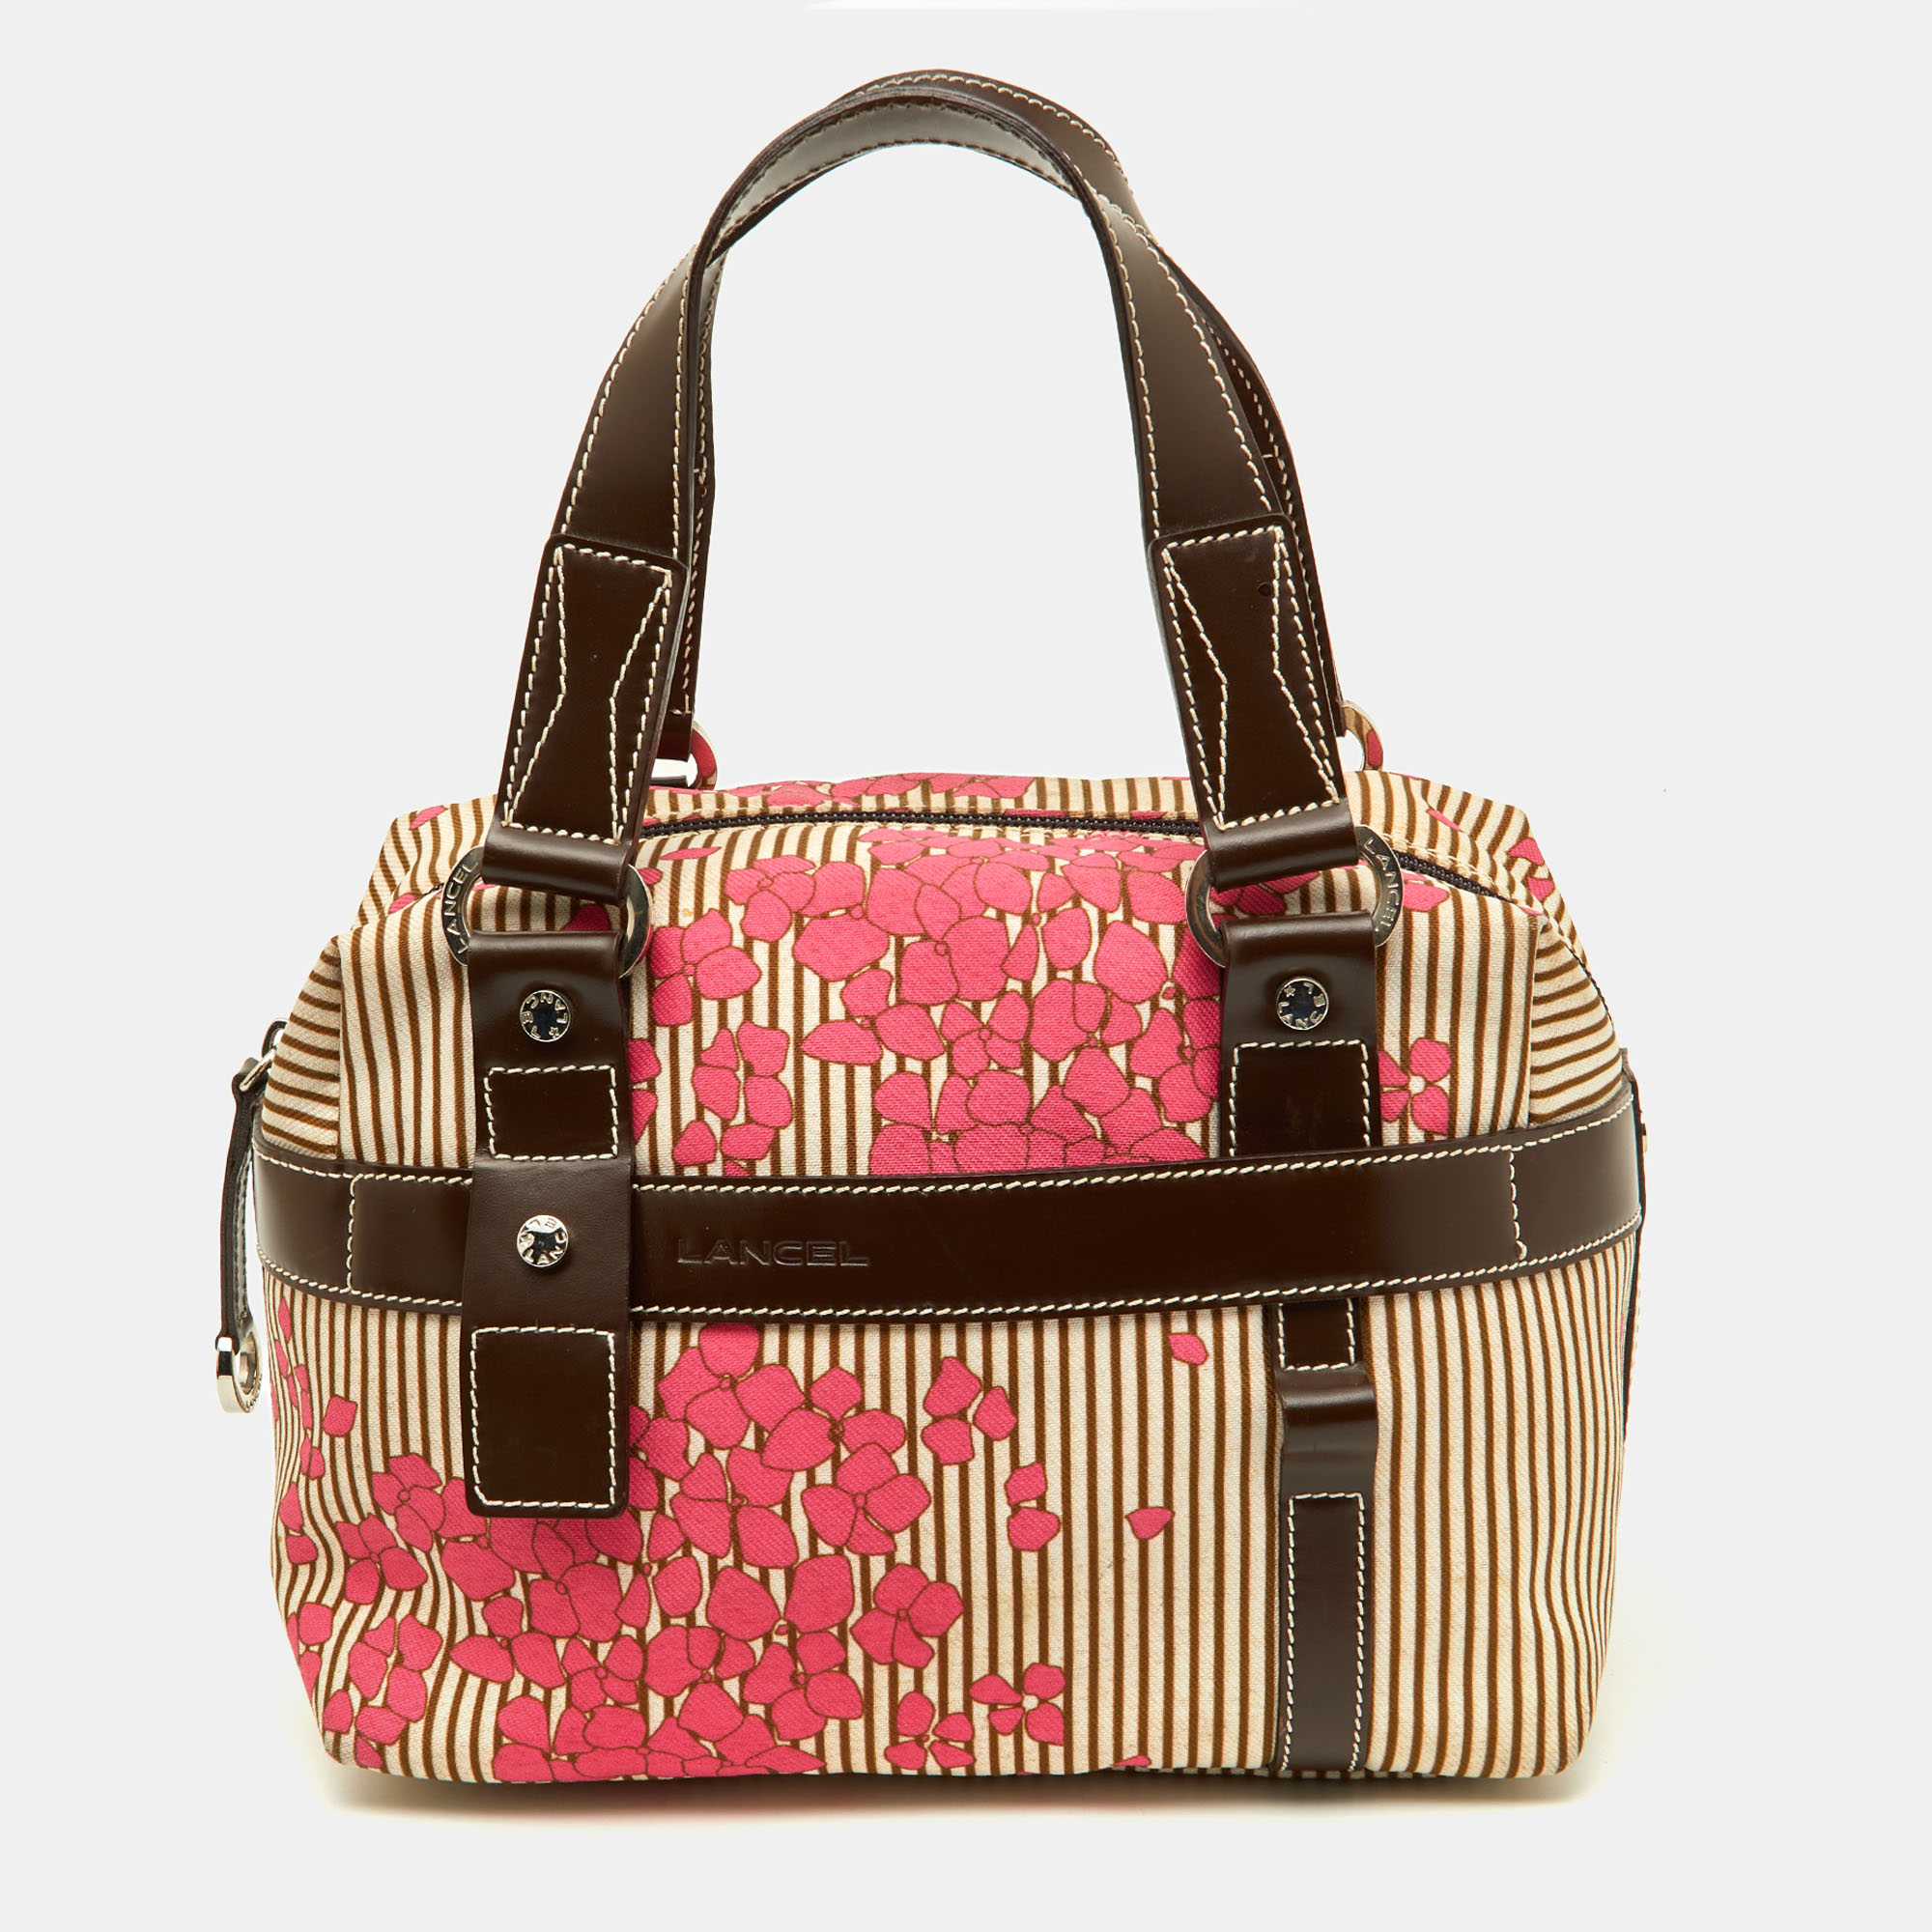 

Lancel Multicolor Floral Fabric and Leather Zip Satchel